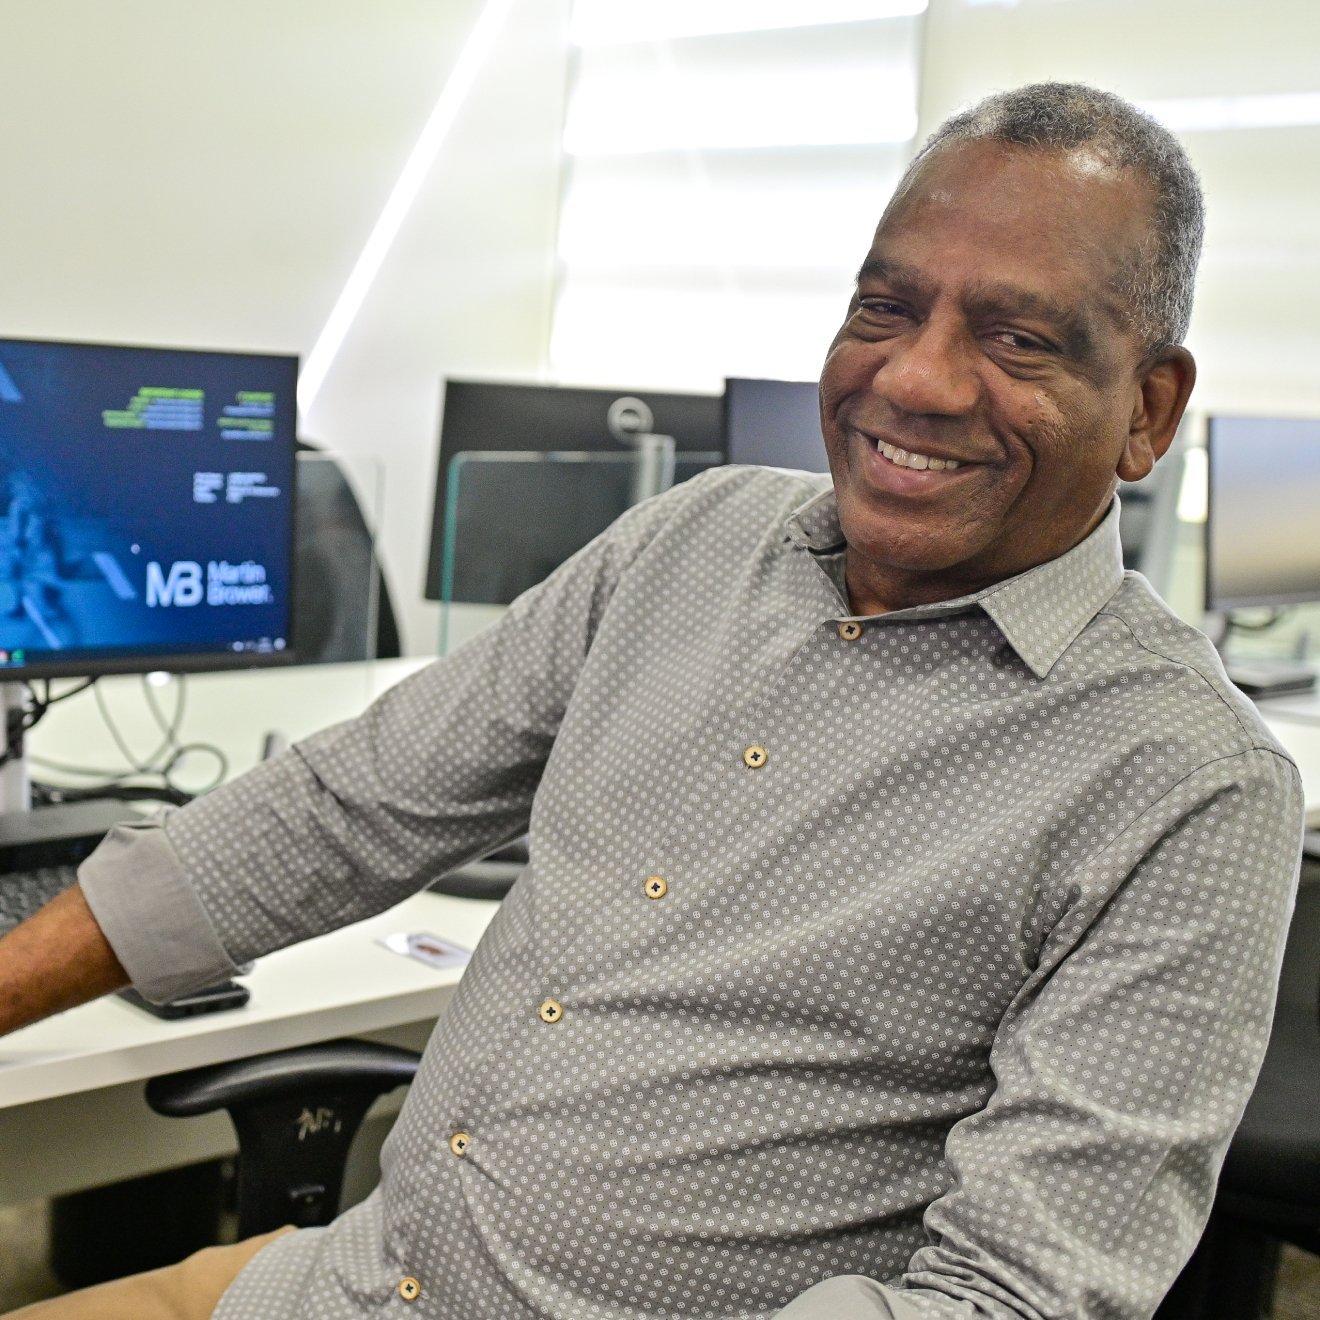 A man smiles while sitting on a chair, turning away from the computer desk